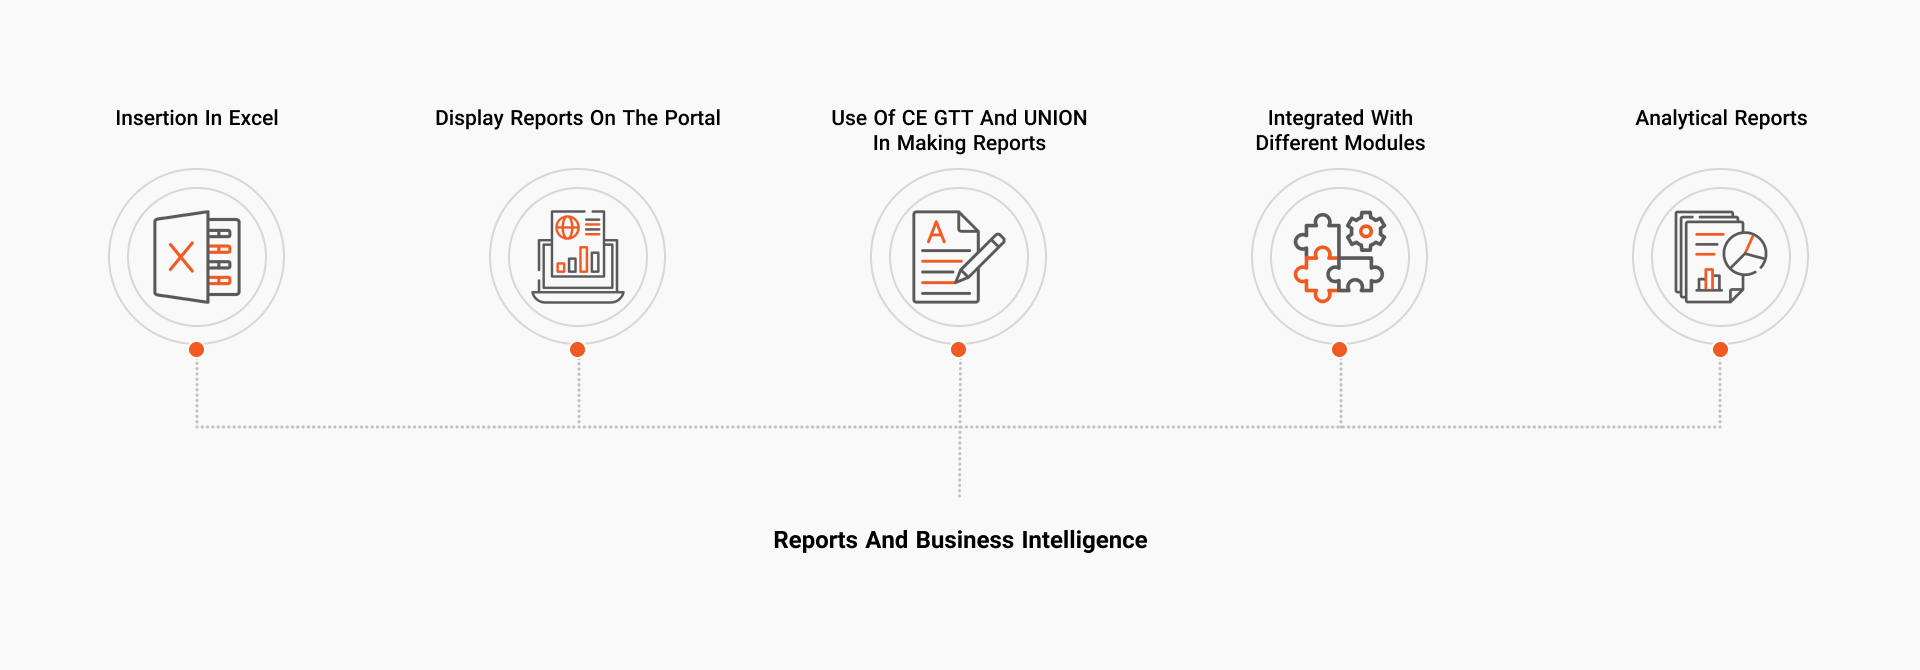 Reports and business intelligence